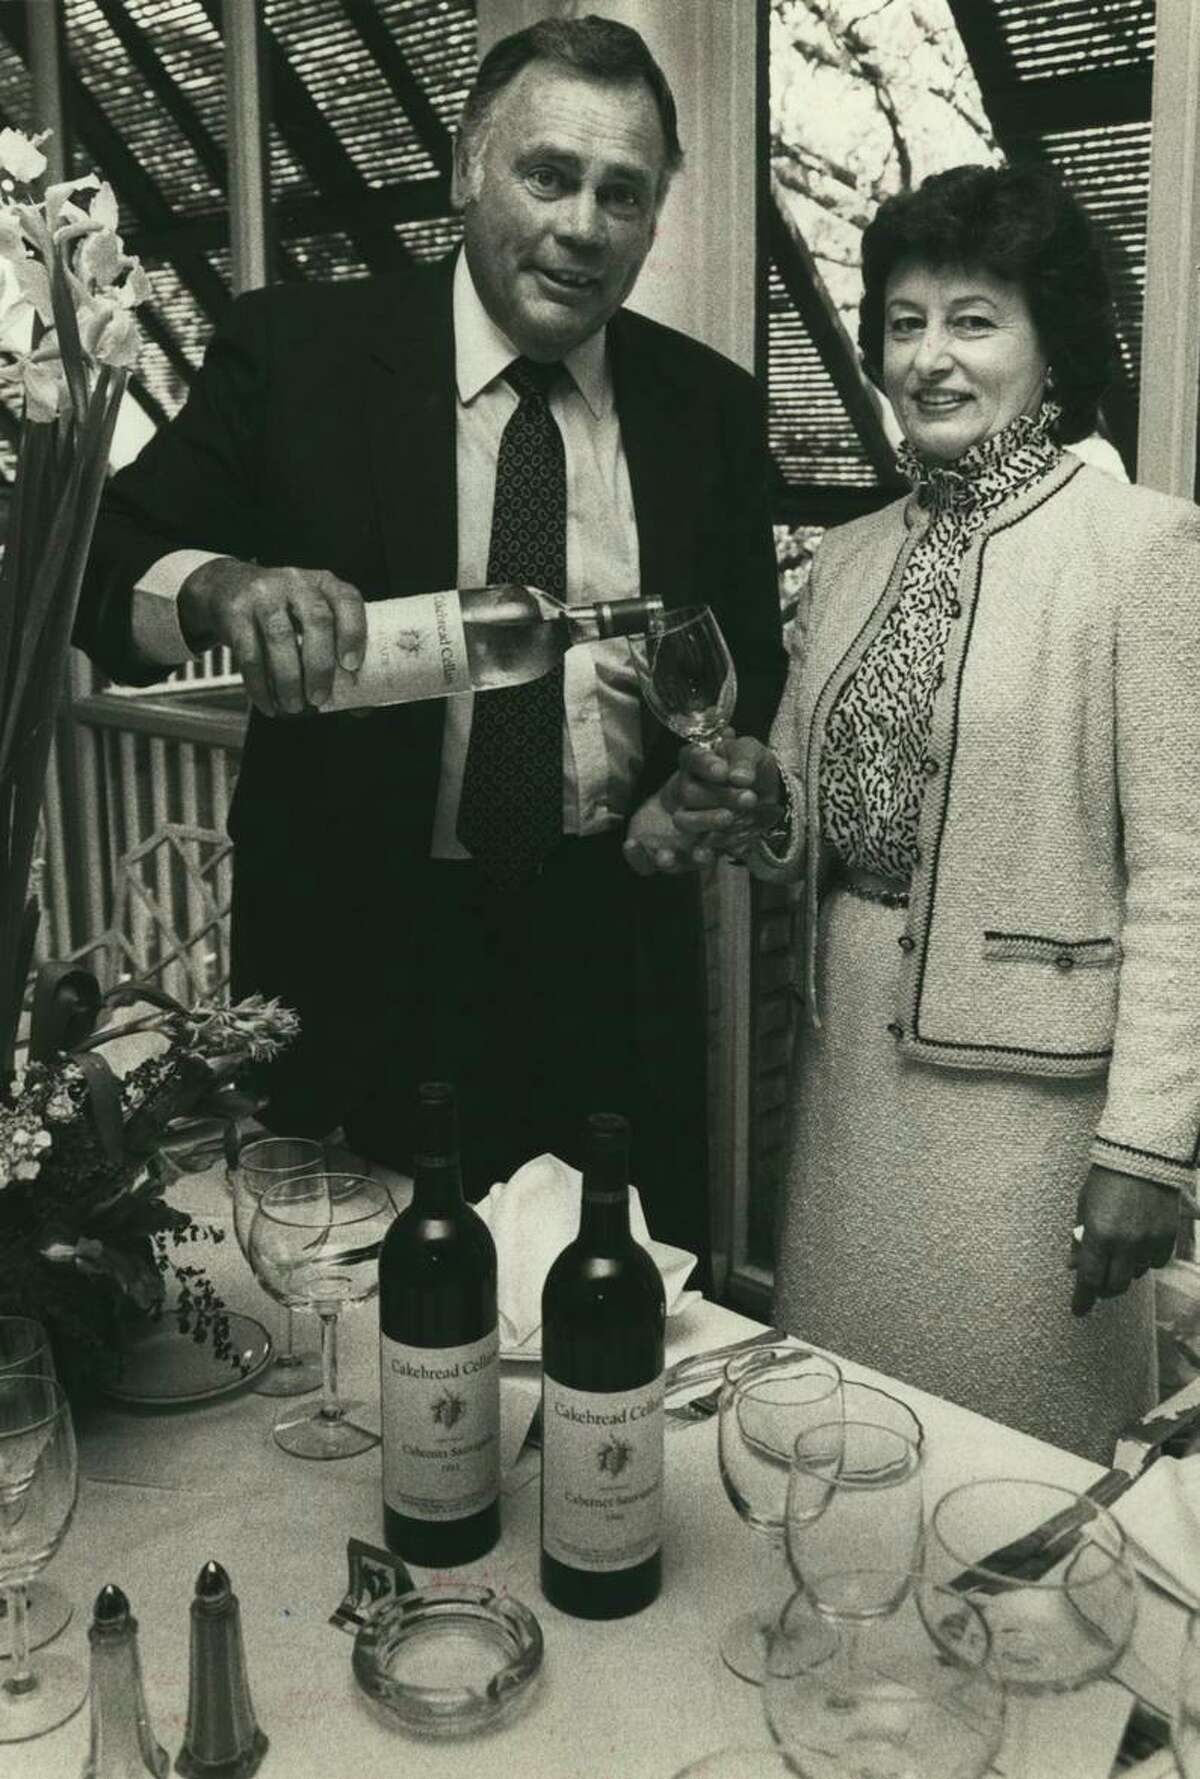 Jack and Dolores Cakebread in Houston in 1984, on a tour to celebrate their winery’s 10th anniversary.